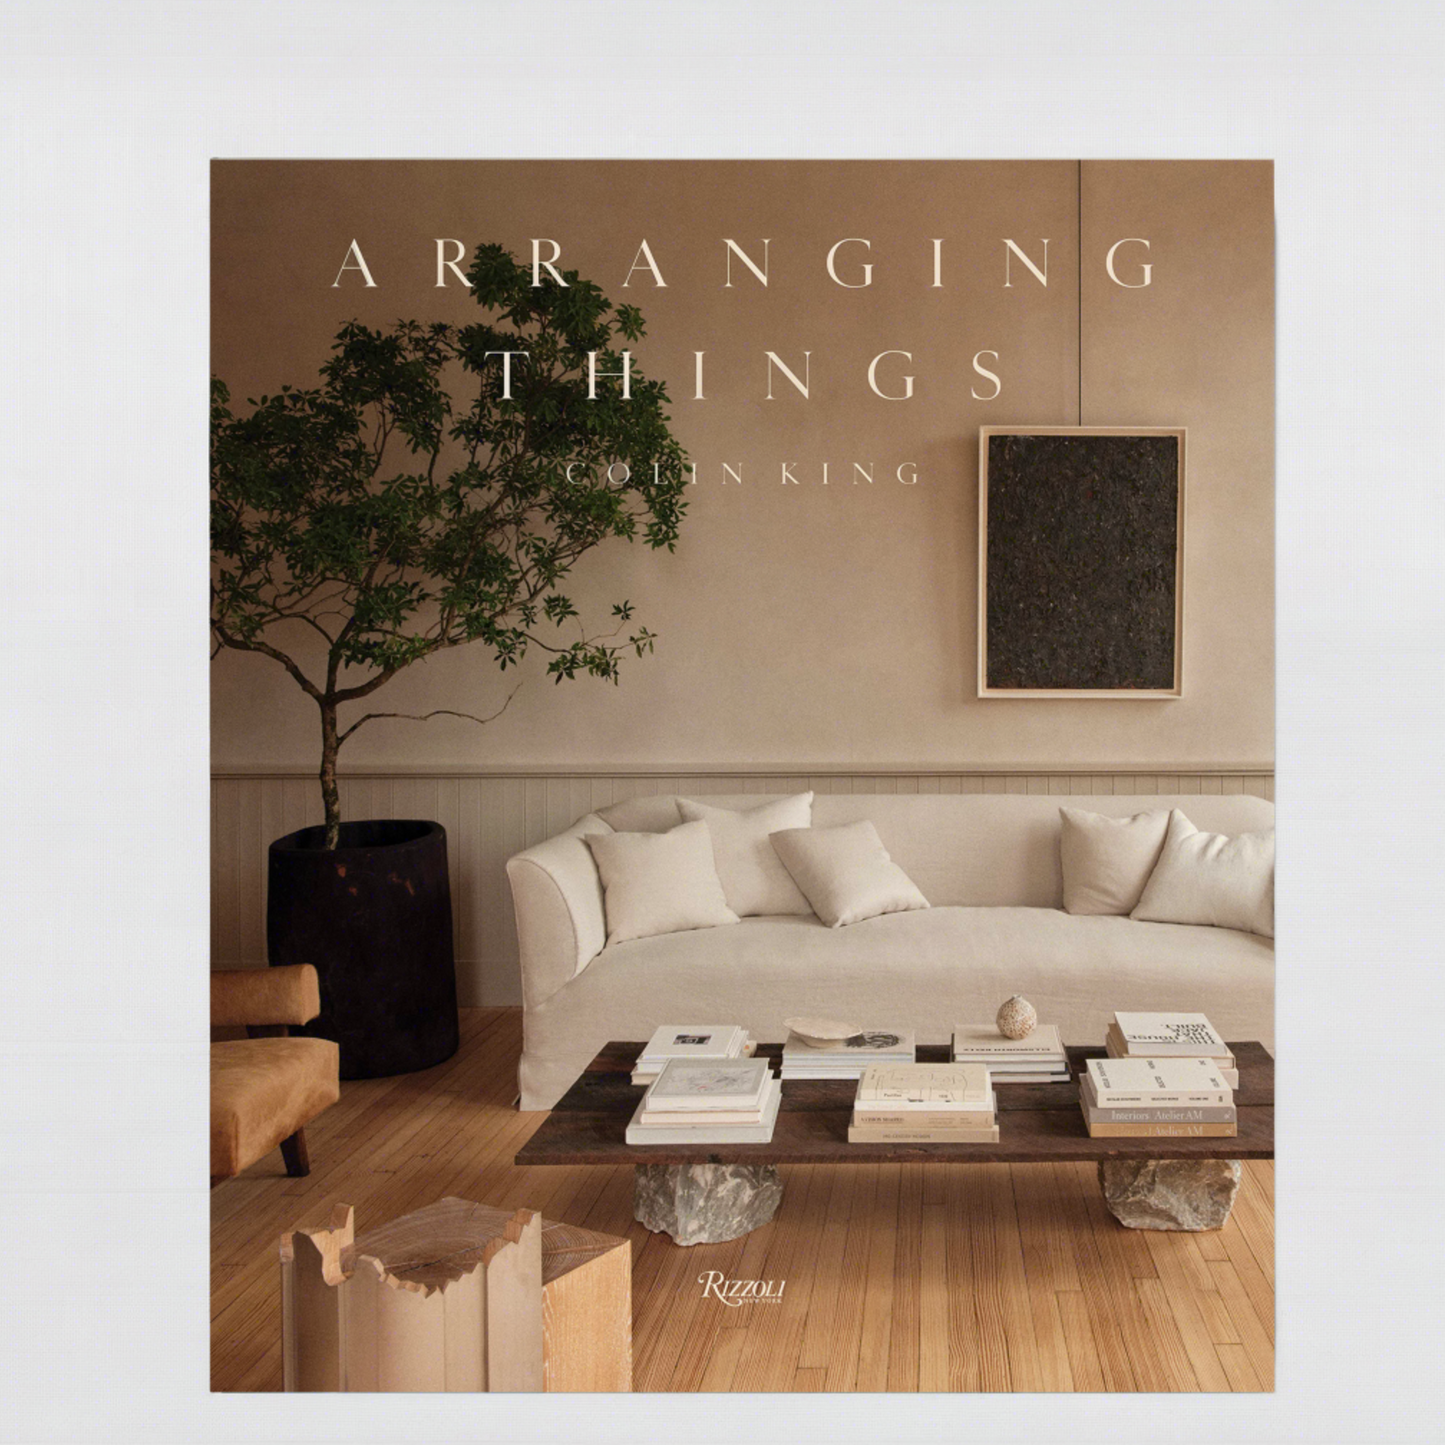 Colin King's "Arranging Things" Book